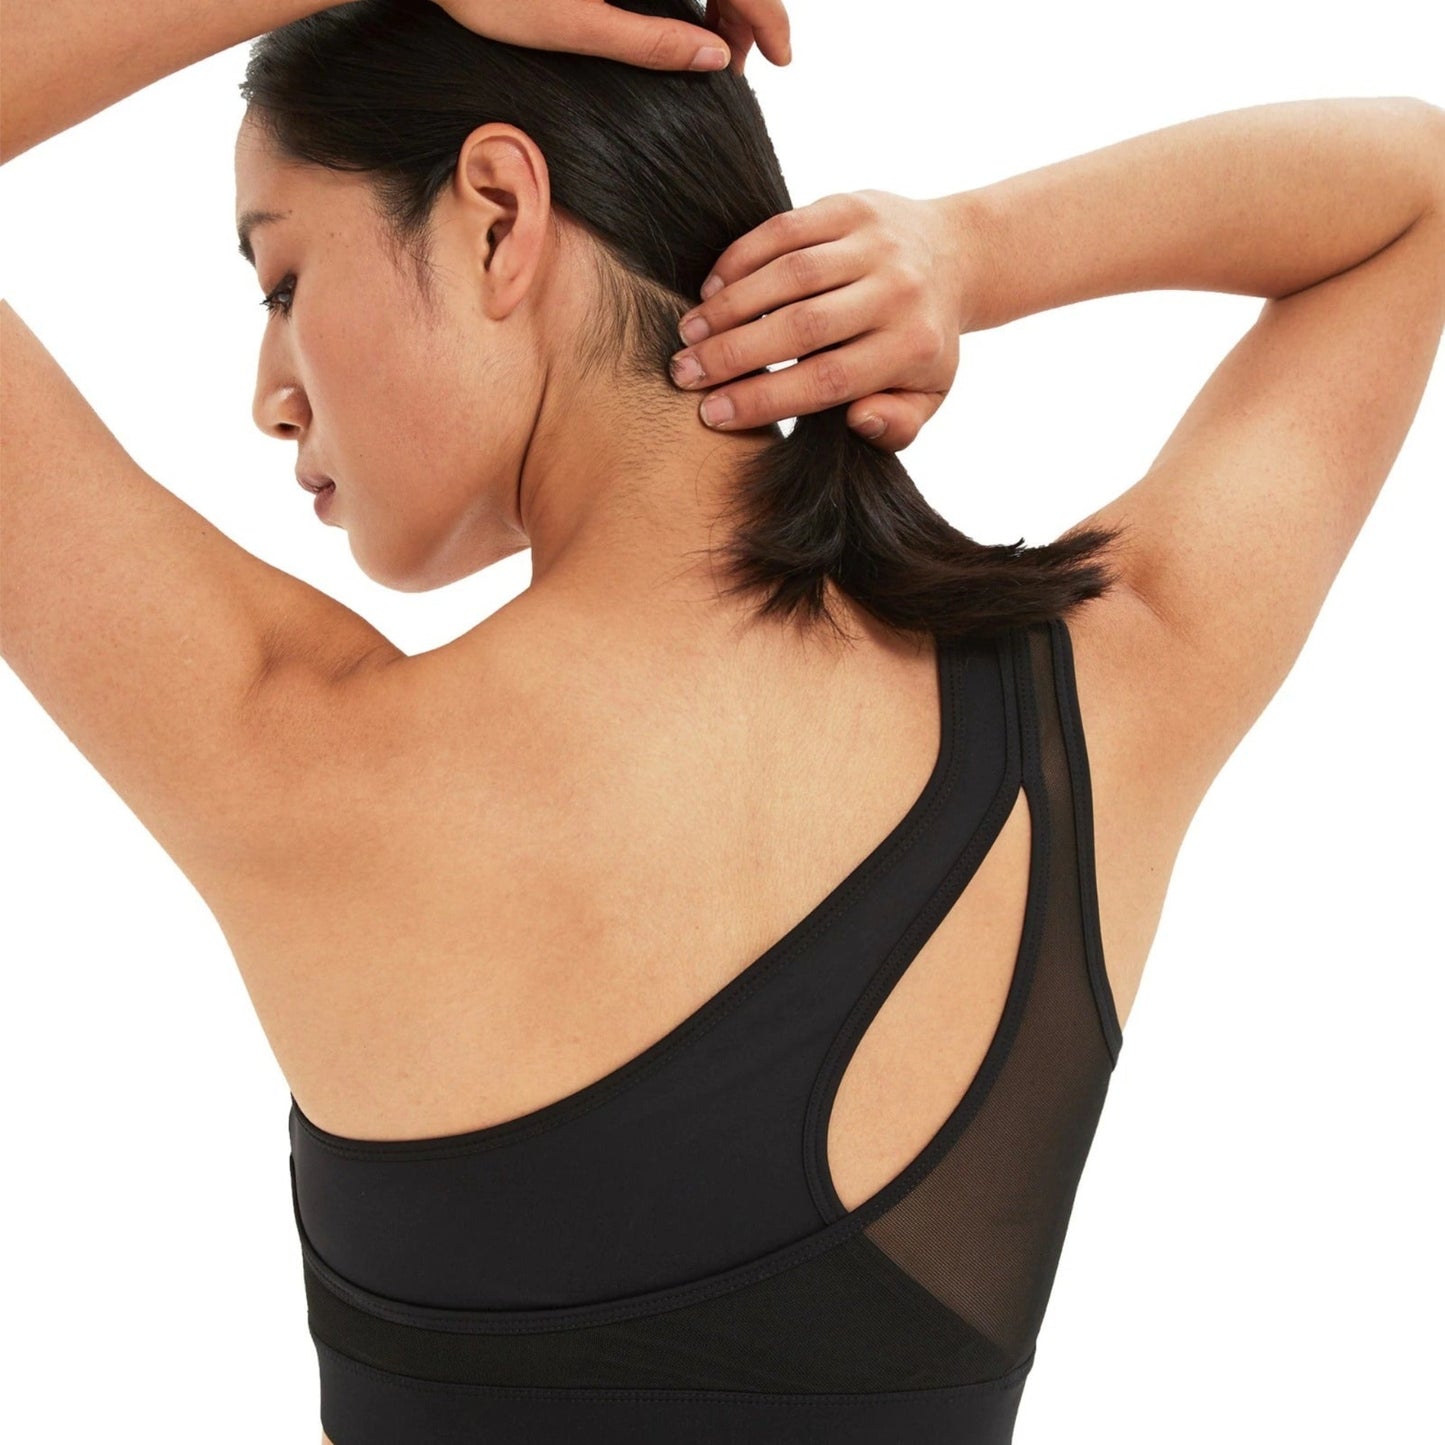 BACK SHOT OF FITNESS MODEL WEARING A ONE SHOULDER, PEEK-A-BOO NECKLINE, BLACK, HIGH IMPACT SPORTS BRA FROM VIBRAS ACTIVEWEAR.